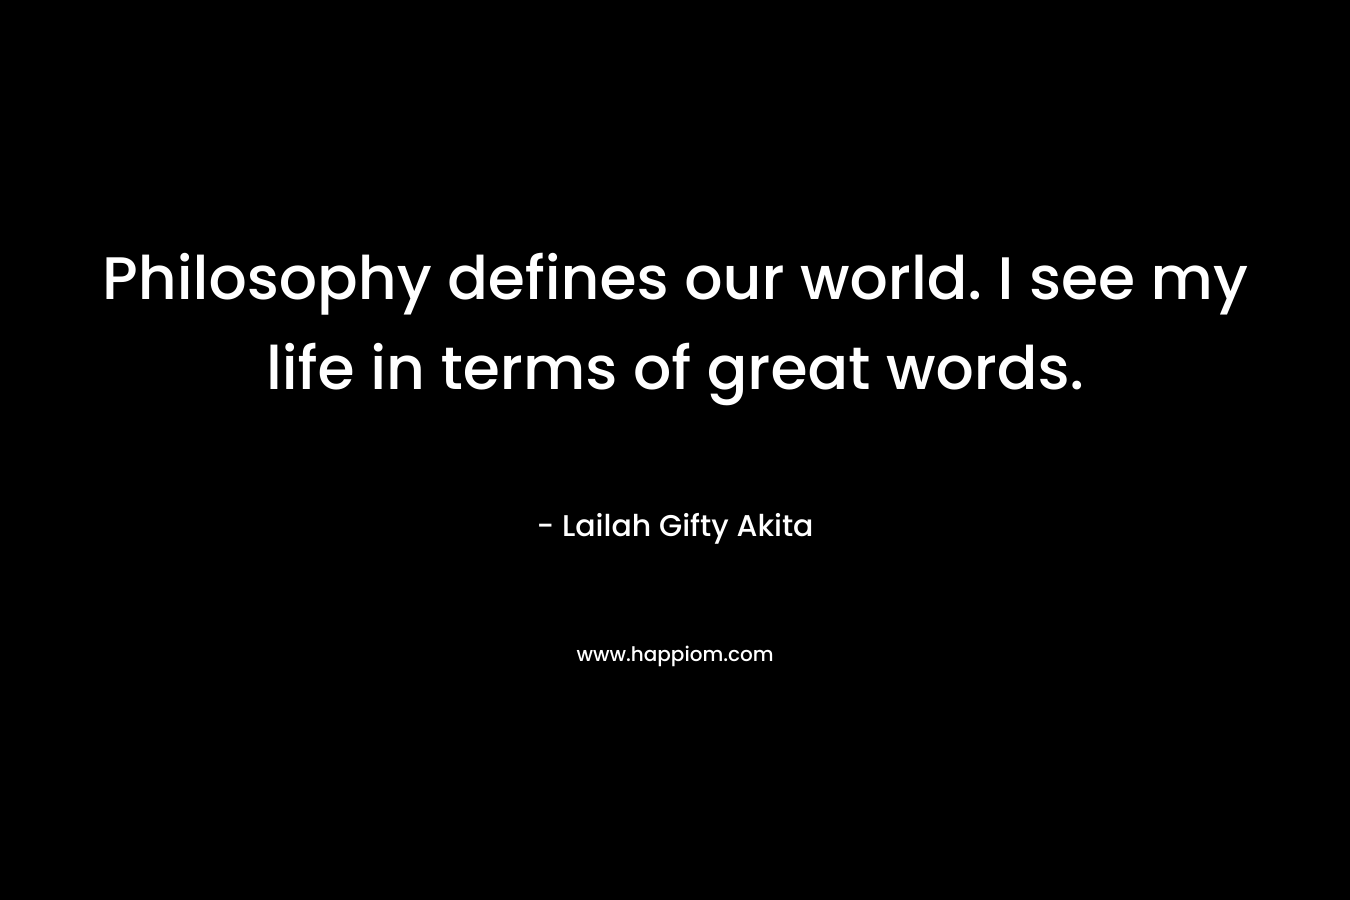 Philosophy defines our world. I see my life in terms of great words.